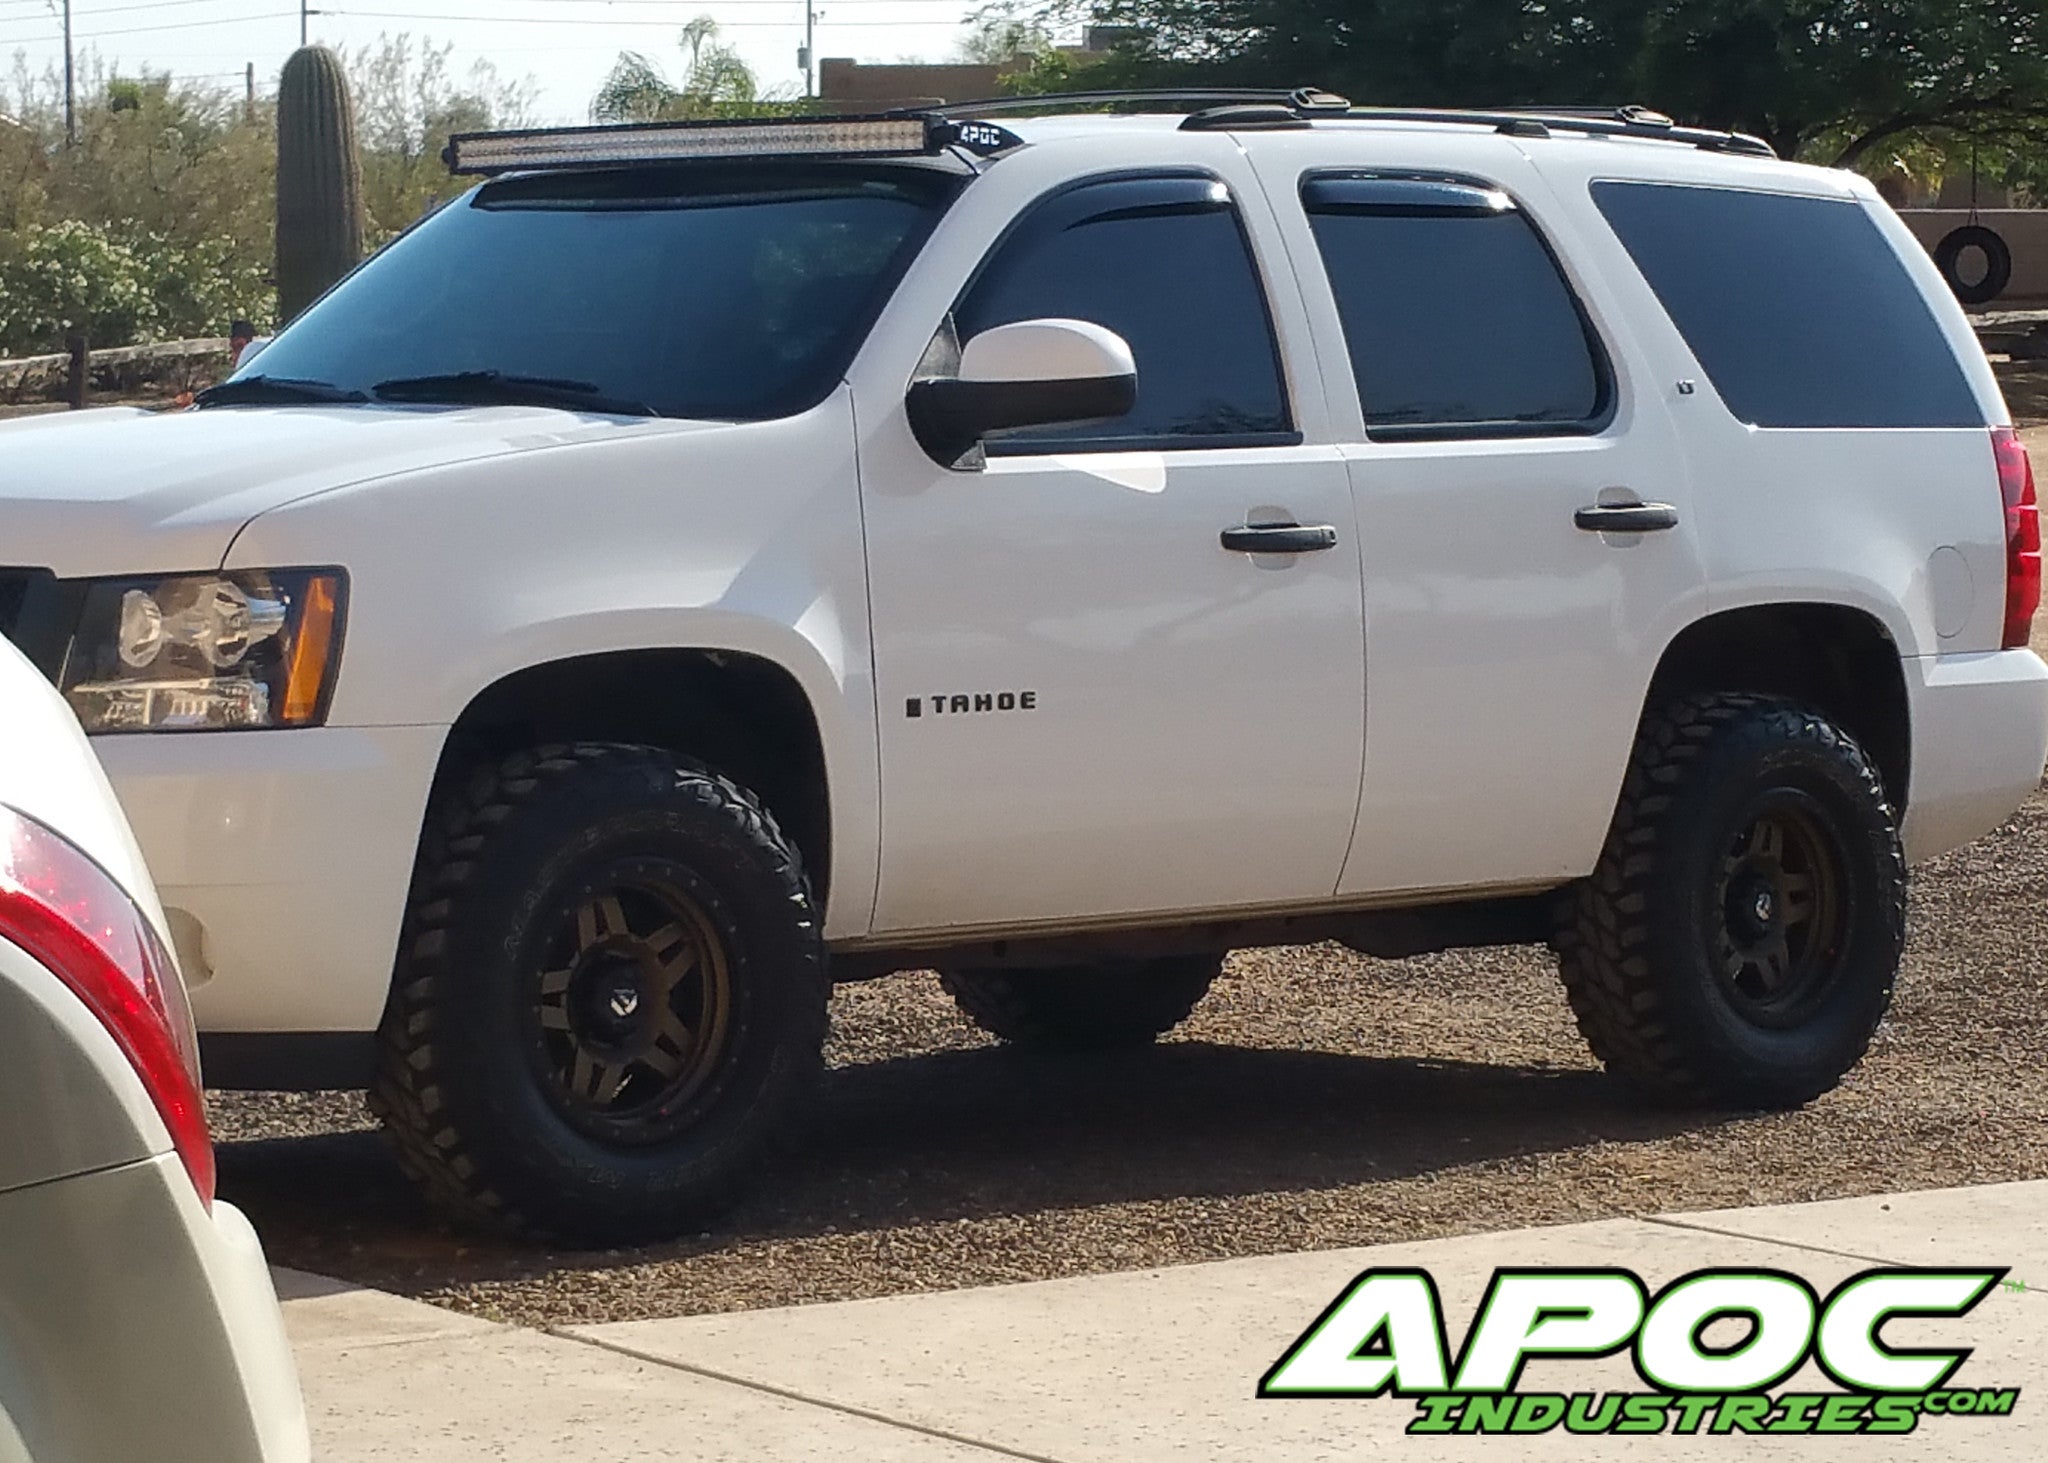 2007-2014 Chevy Tahoe / Suburban Apoc Roof Mount for 52" Curved Led Light Bar - Apoc Industries